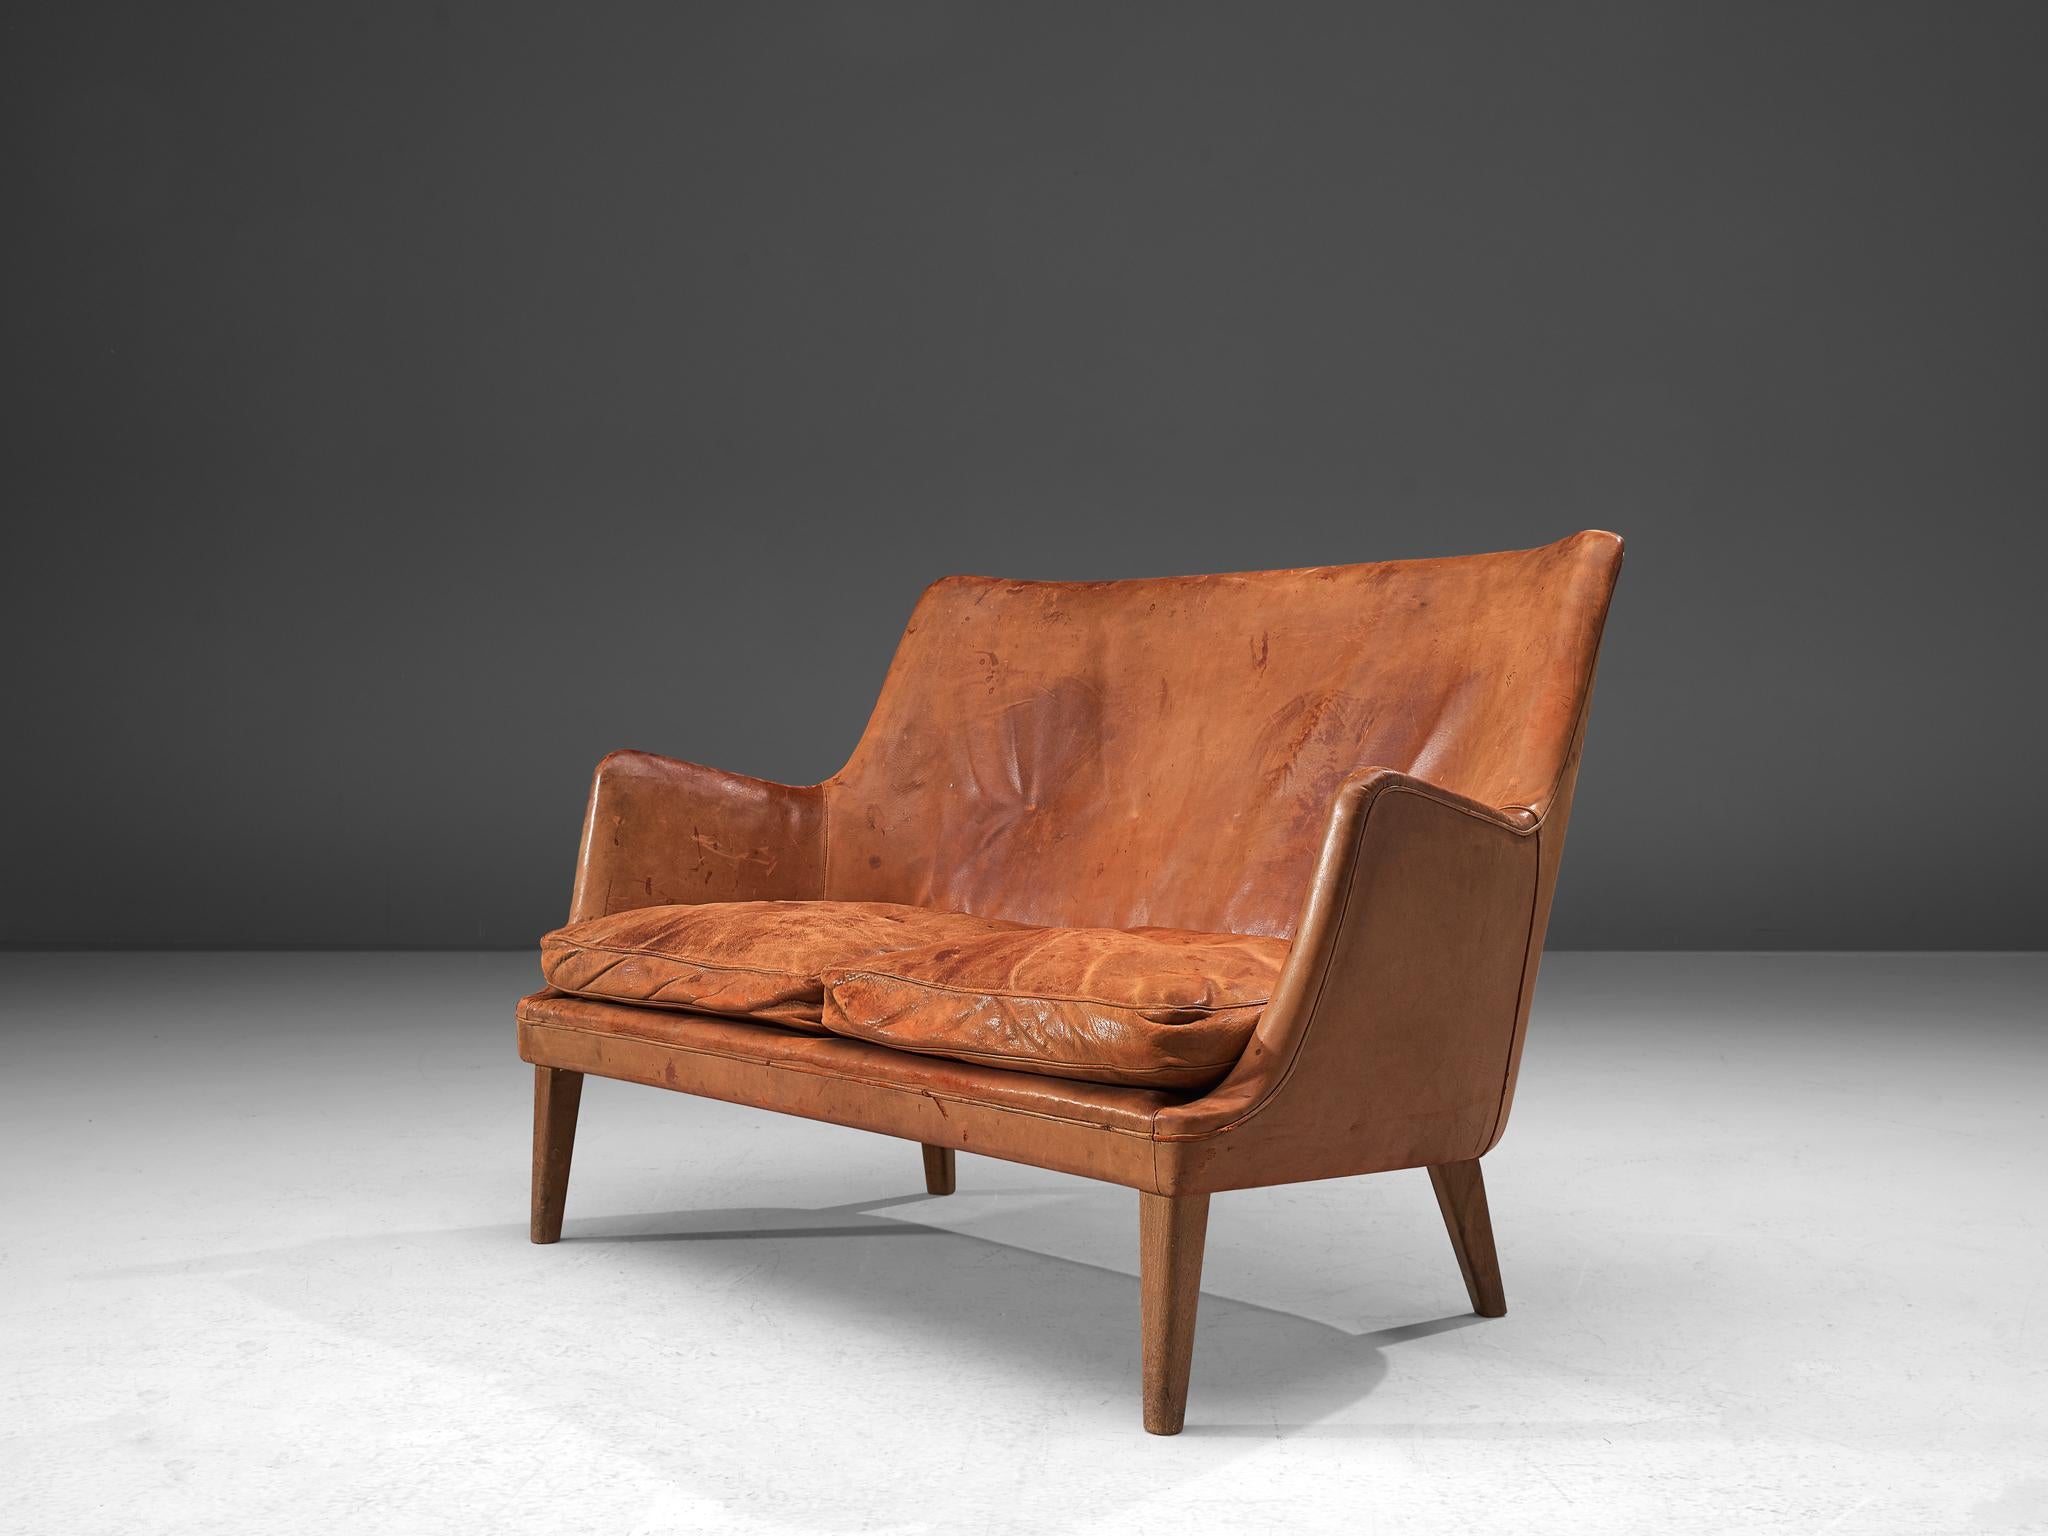 Arne Vodder for Ivan Schlechter, settee sofa, patinated leather and teak, Denmark, design 1953, manufactured late 1950s-1960s.

Elegant two-seat settee in admirable cognac leather and teak by Danish designer Arne Vodder and upholstered by master